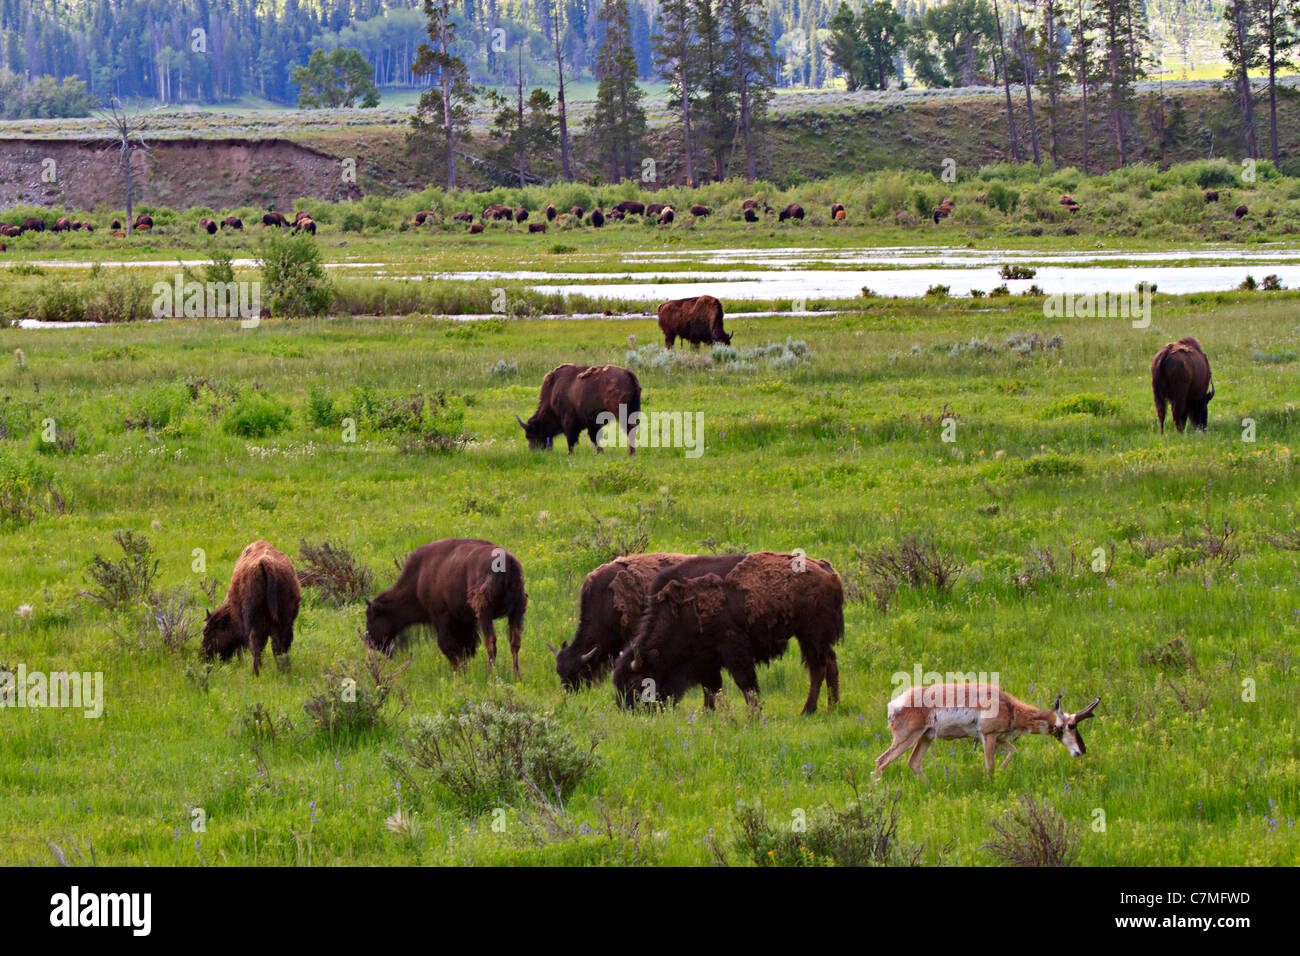 American Bison, Bison bison, and Pronghorn, Antilocapra americana, in the Lamar Valley, Yellowstone National Park, Wyoming. Stock Photo